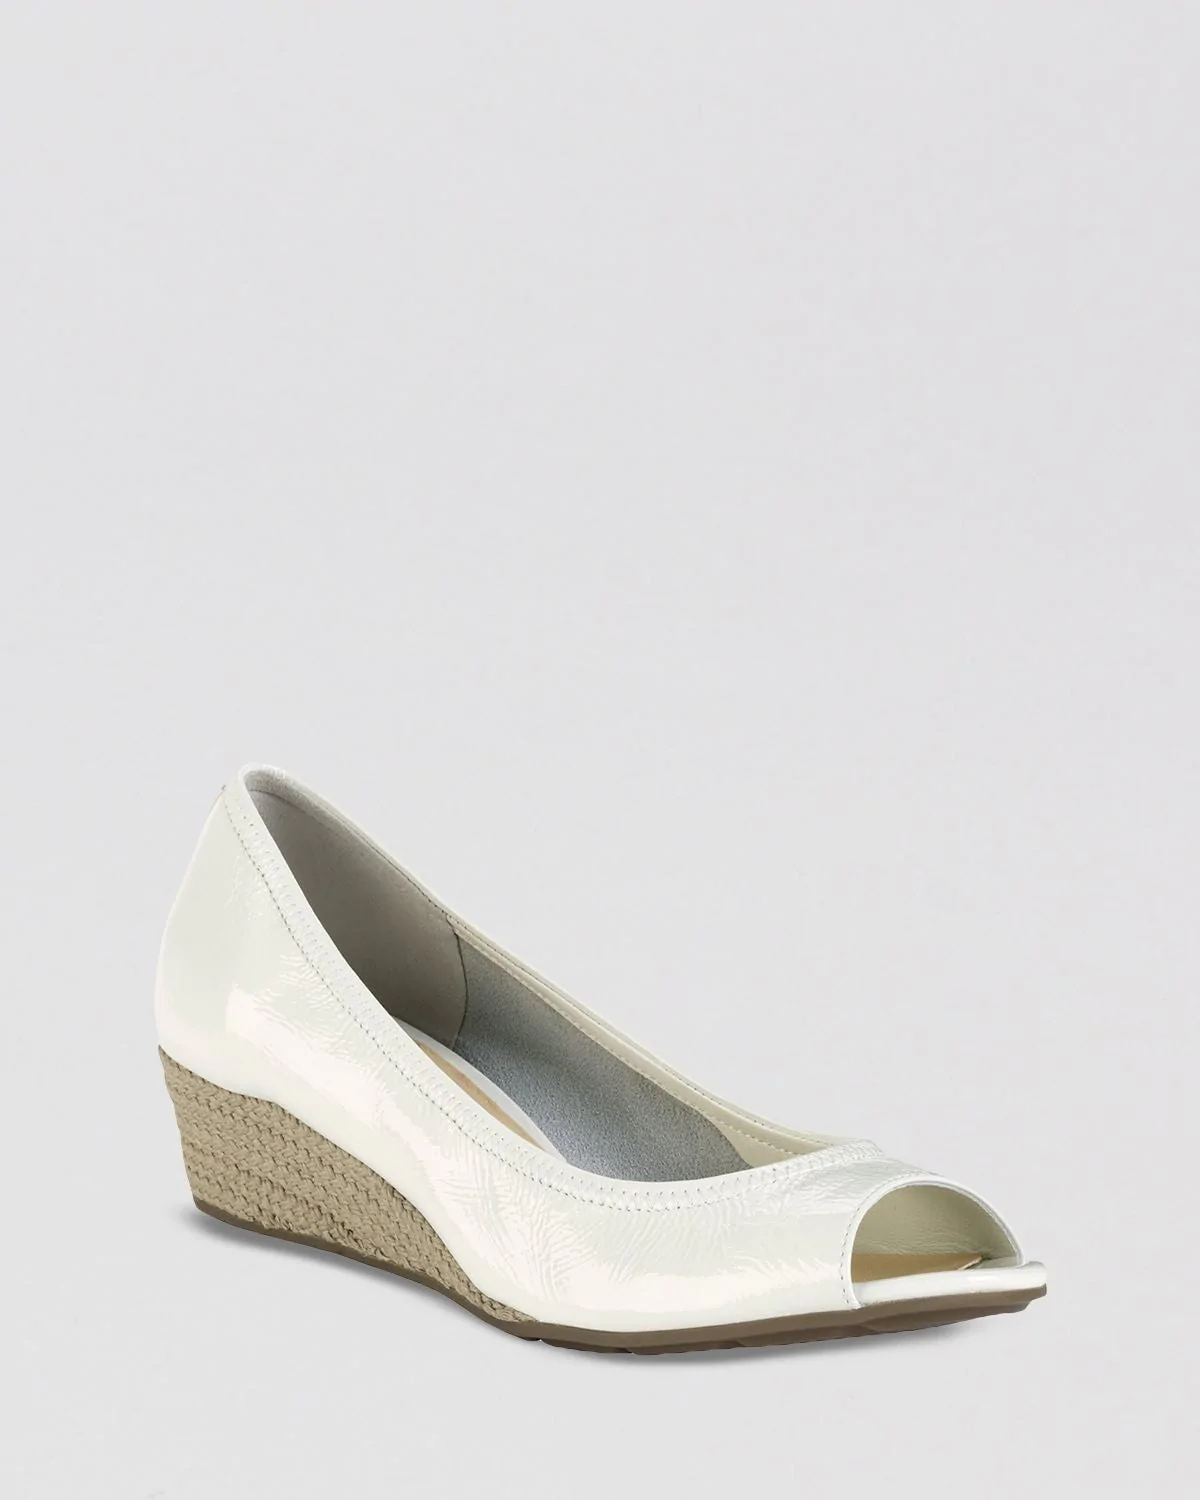 Cole Haan Open Toe Wedge Pumps - Air Tali